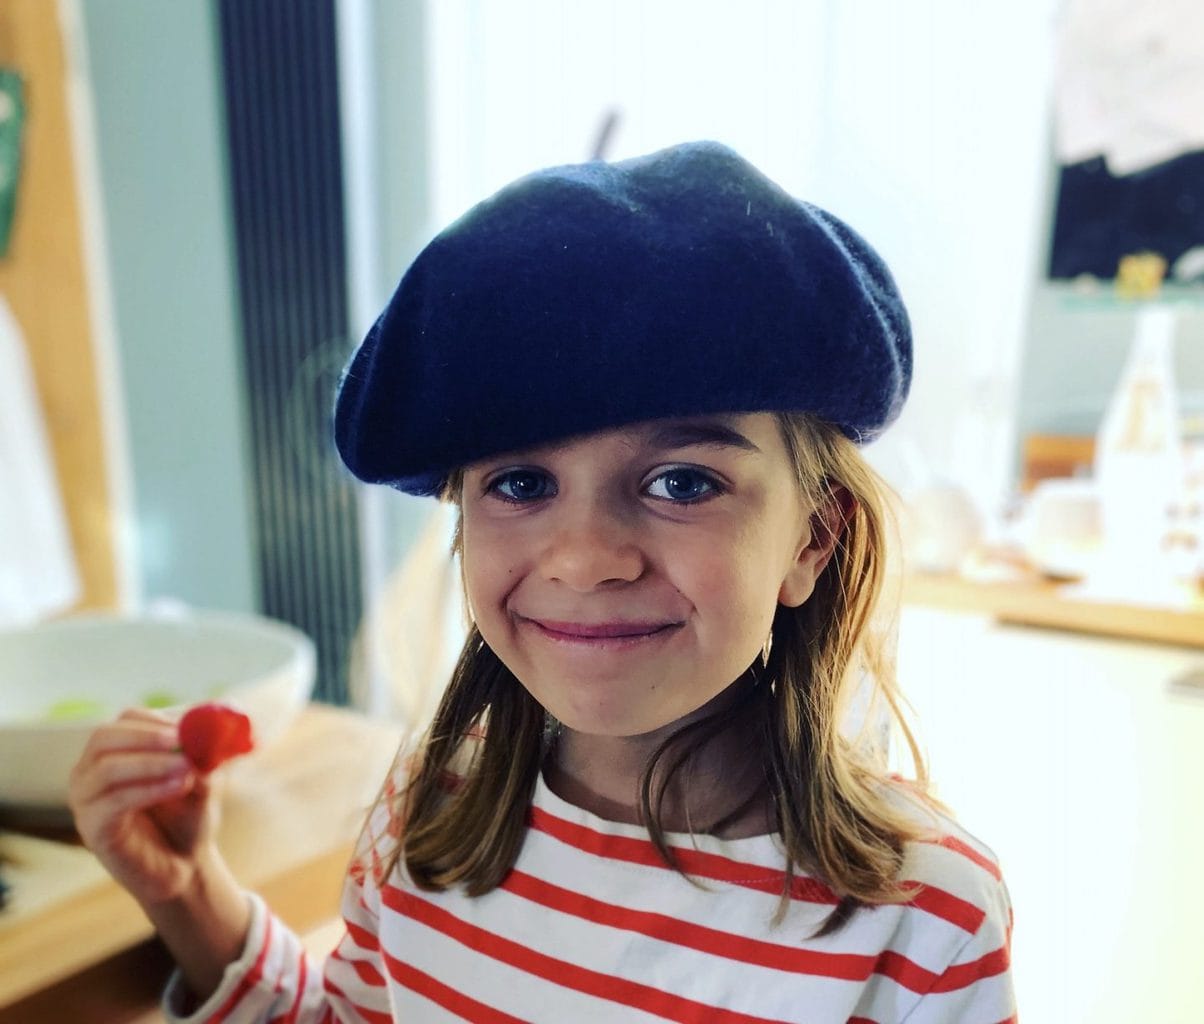 French Day at Home | Re-creating France at Home with Kids